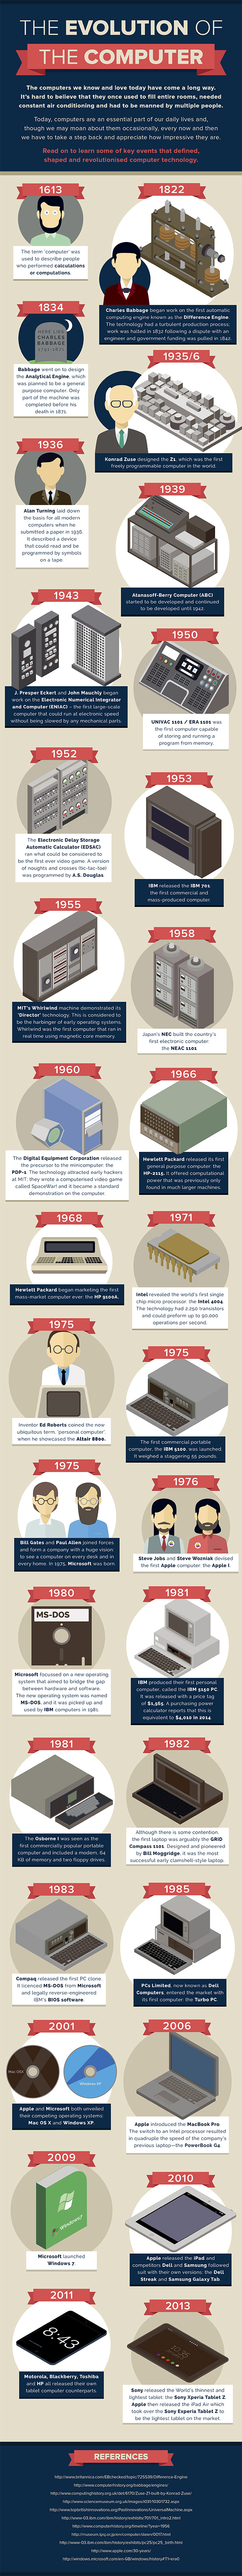 evolution of computers infographic